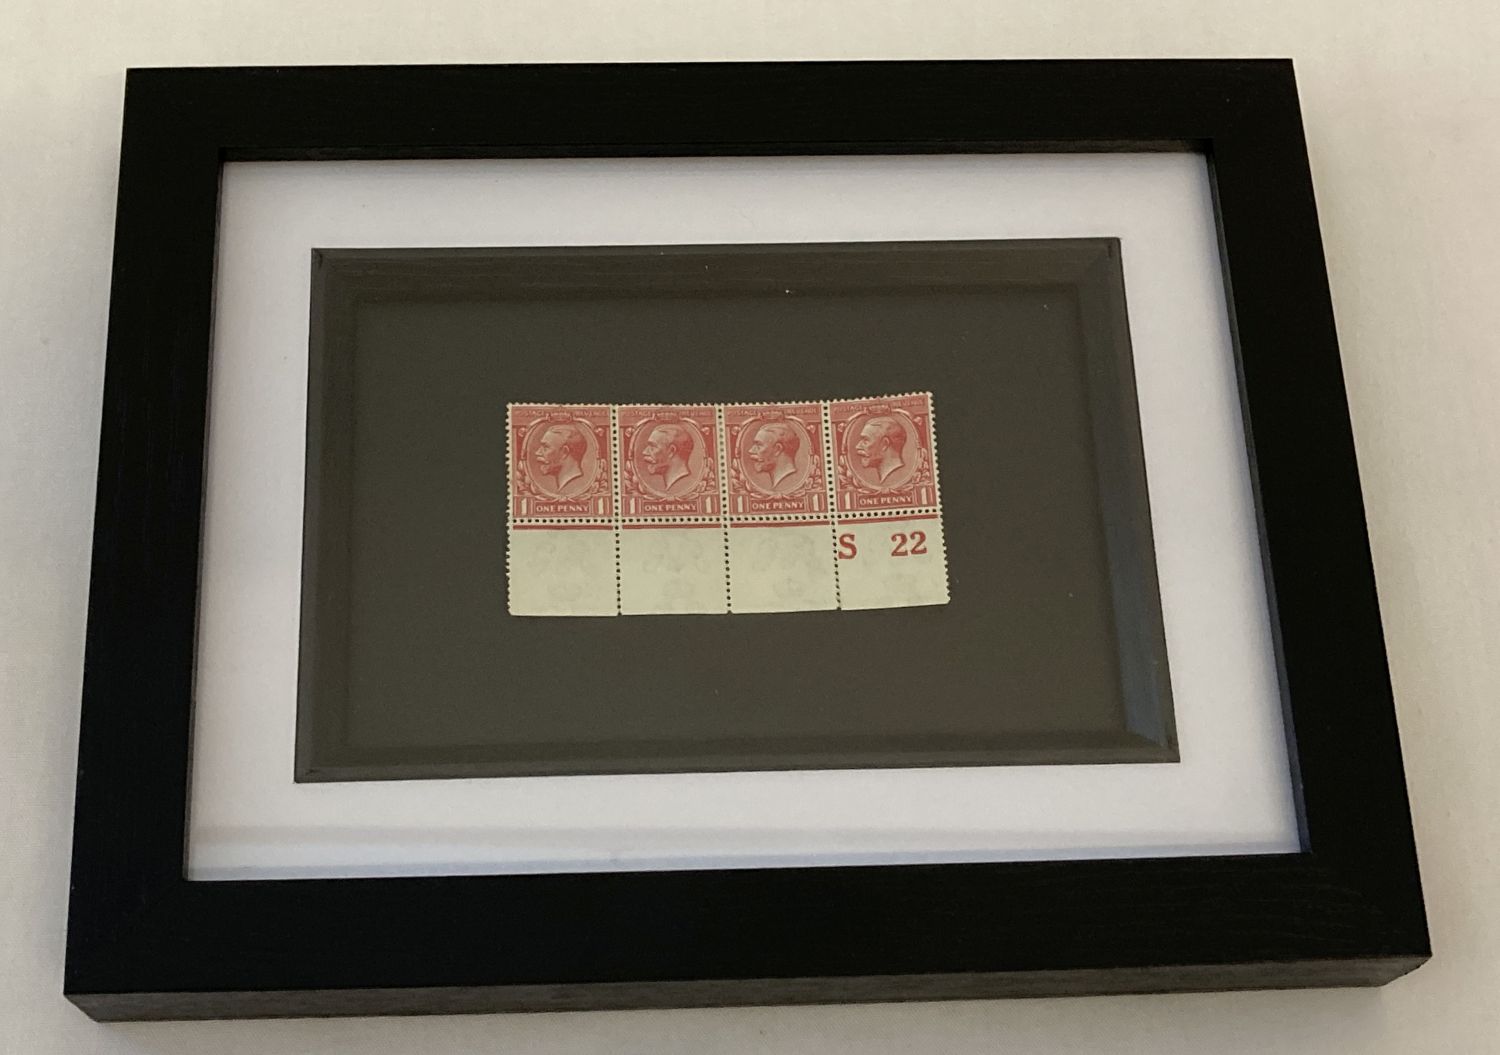 A framed and glazed S22 control block of 1929 George V red penny stamps, unfranked.